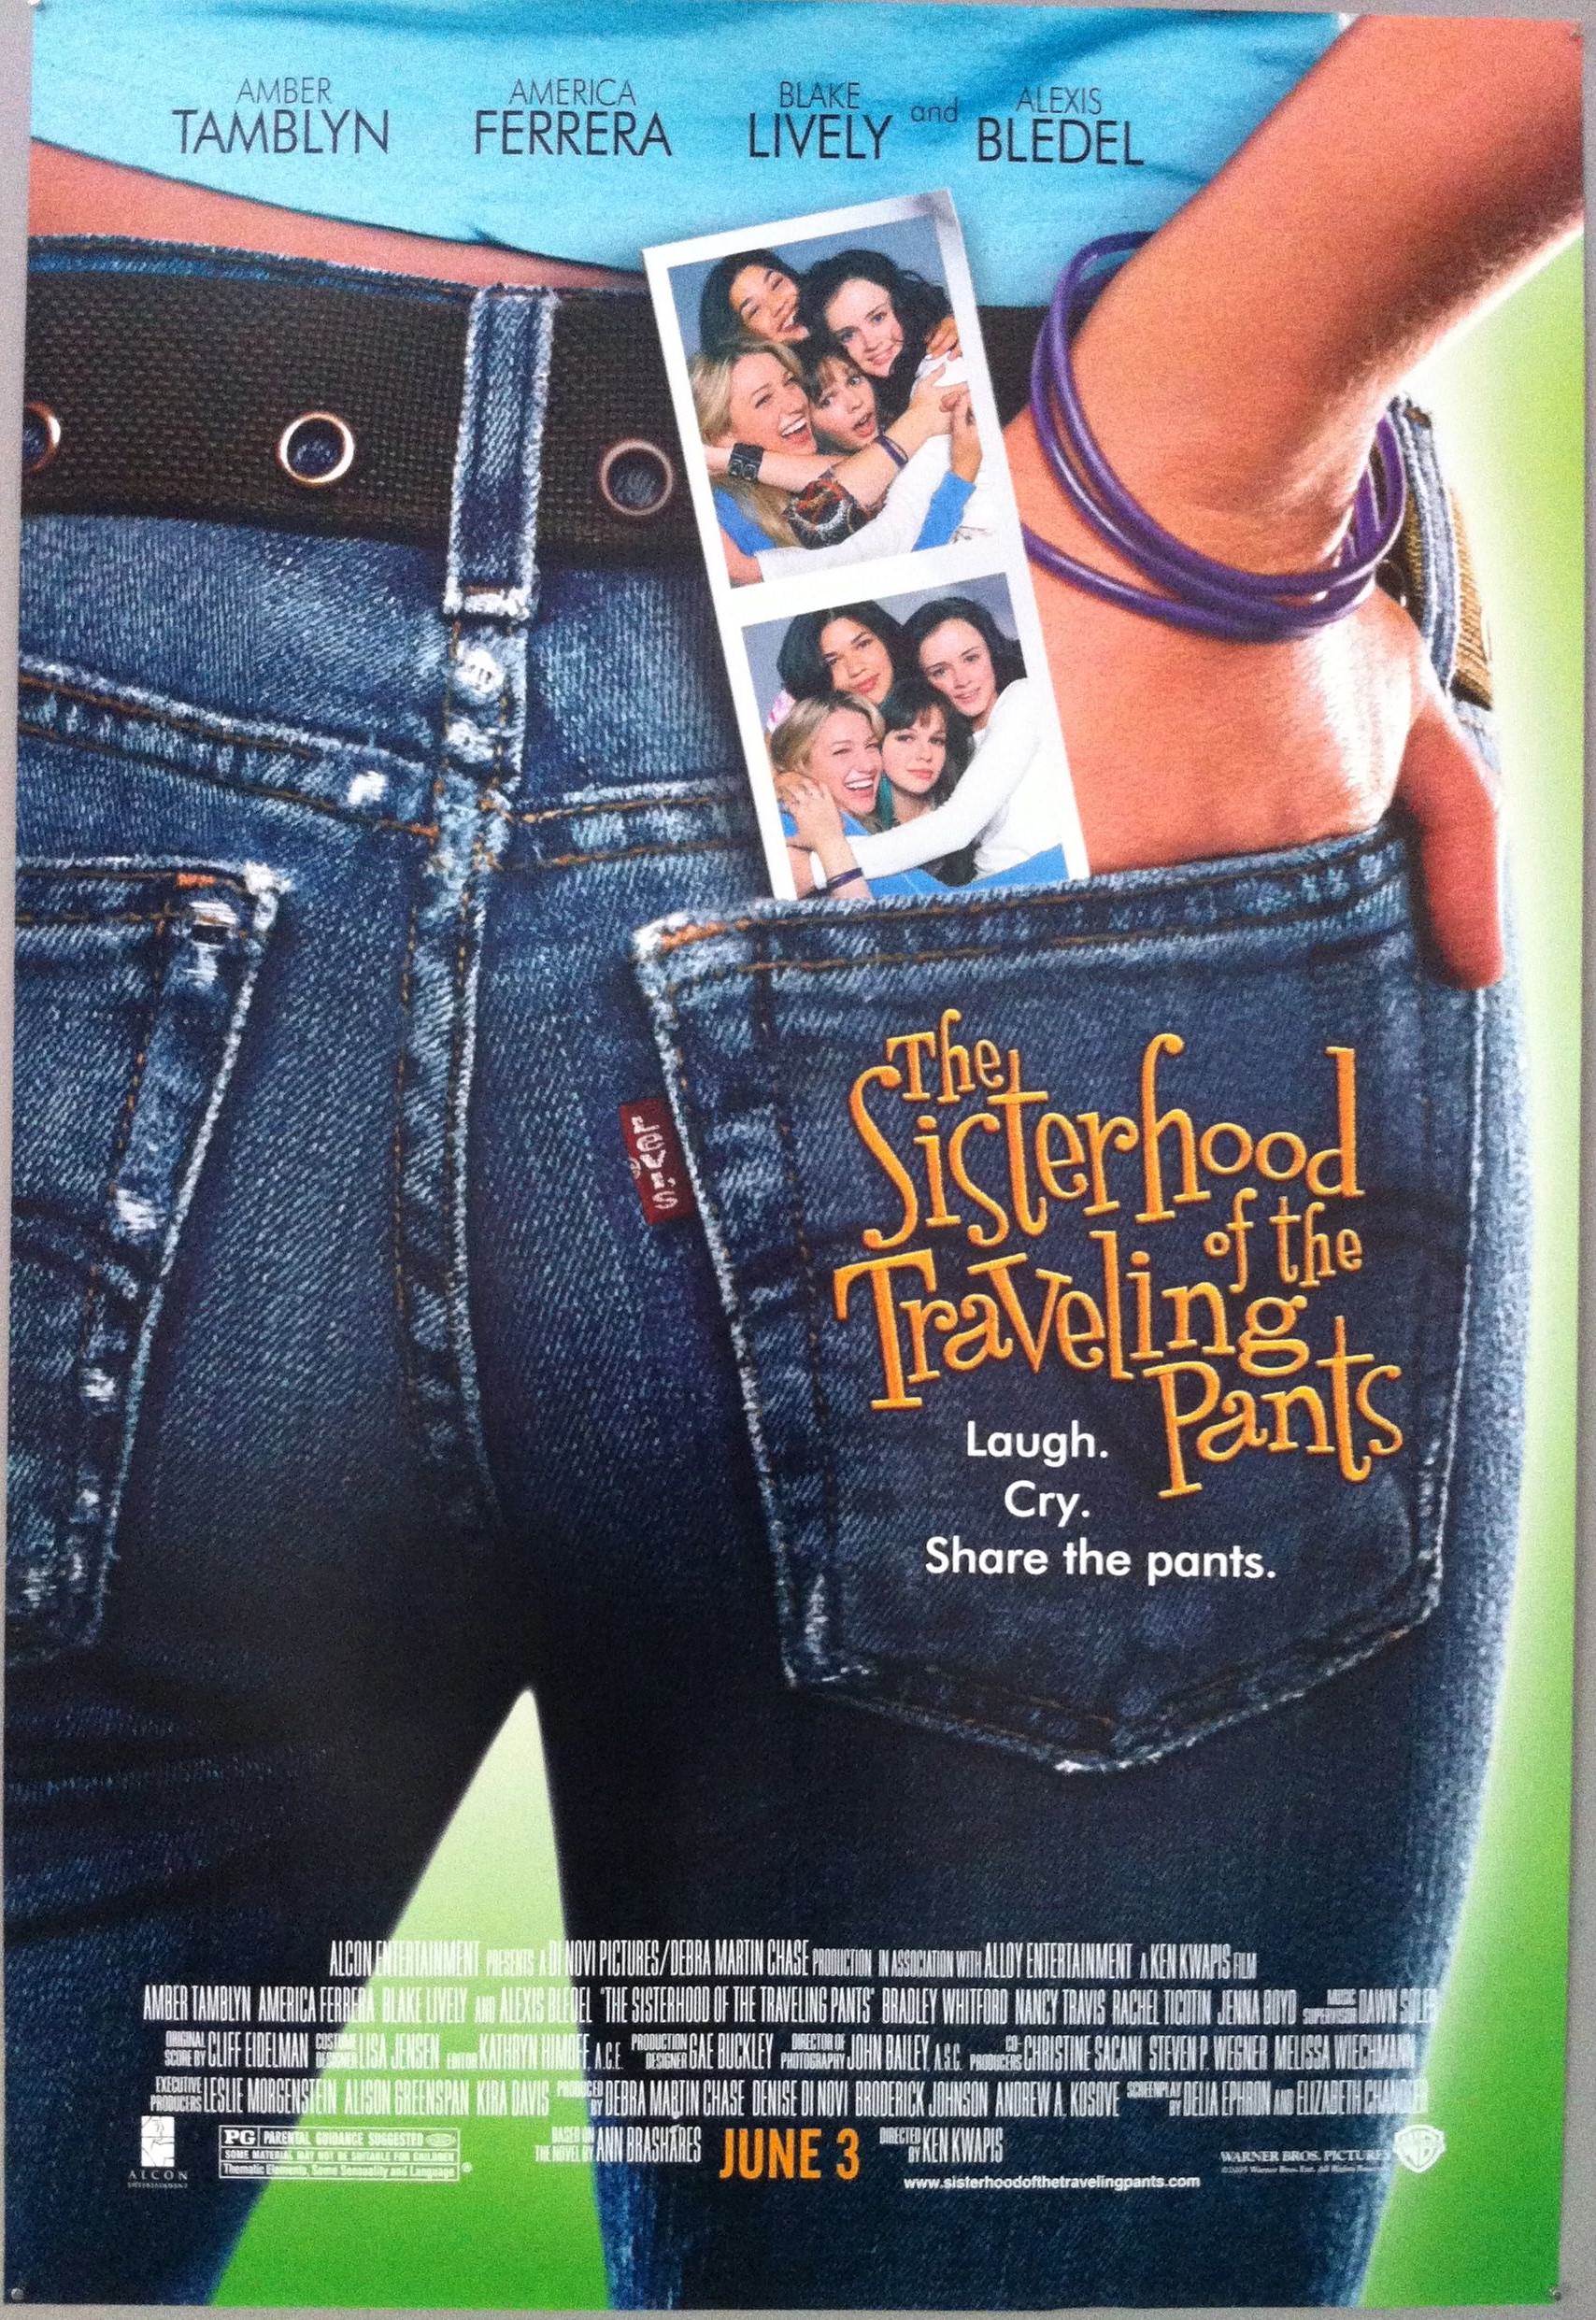 The Sisterhood of the Traveling Pants – Poster Museum1708 x 2483